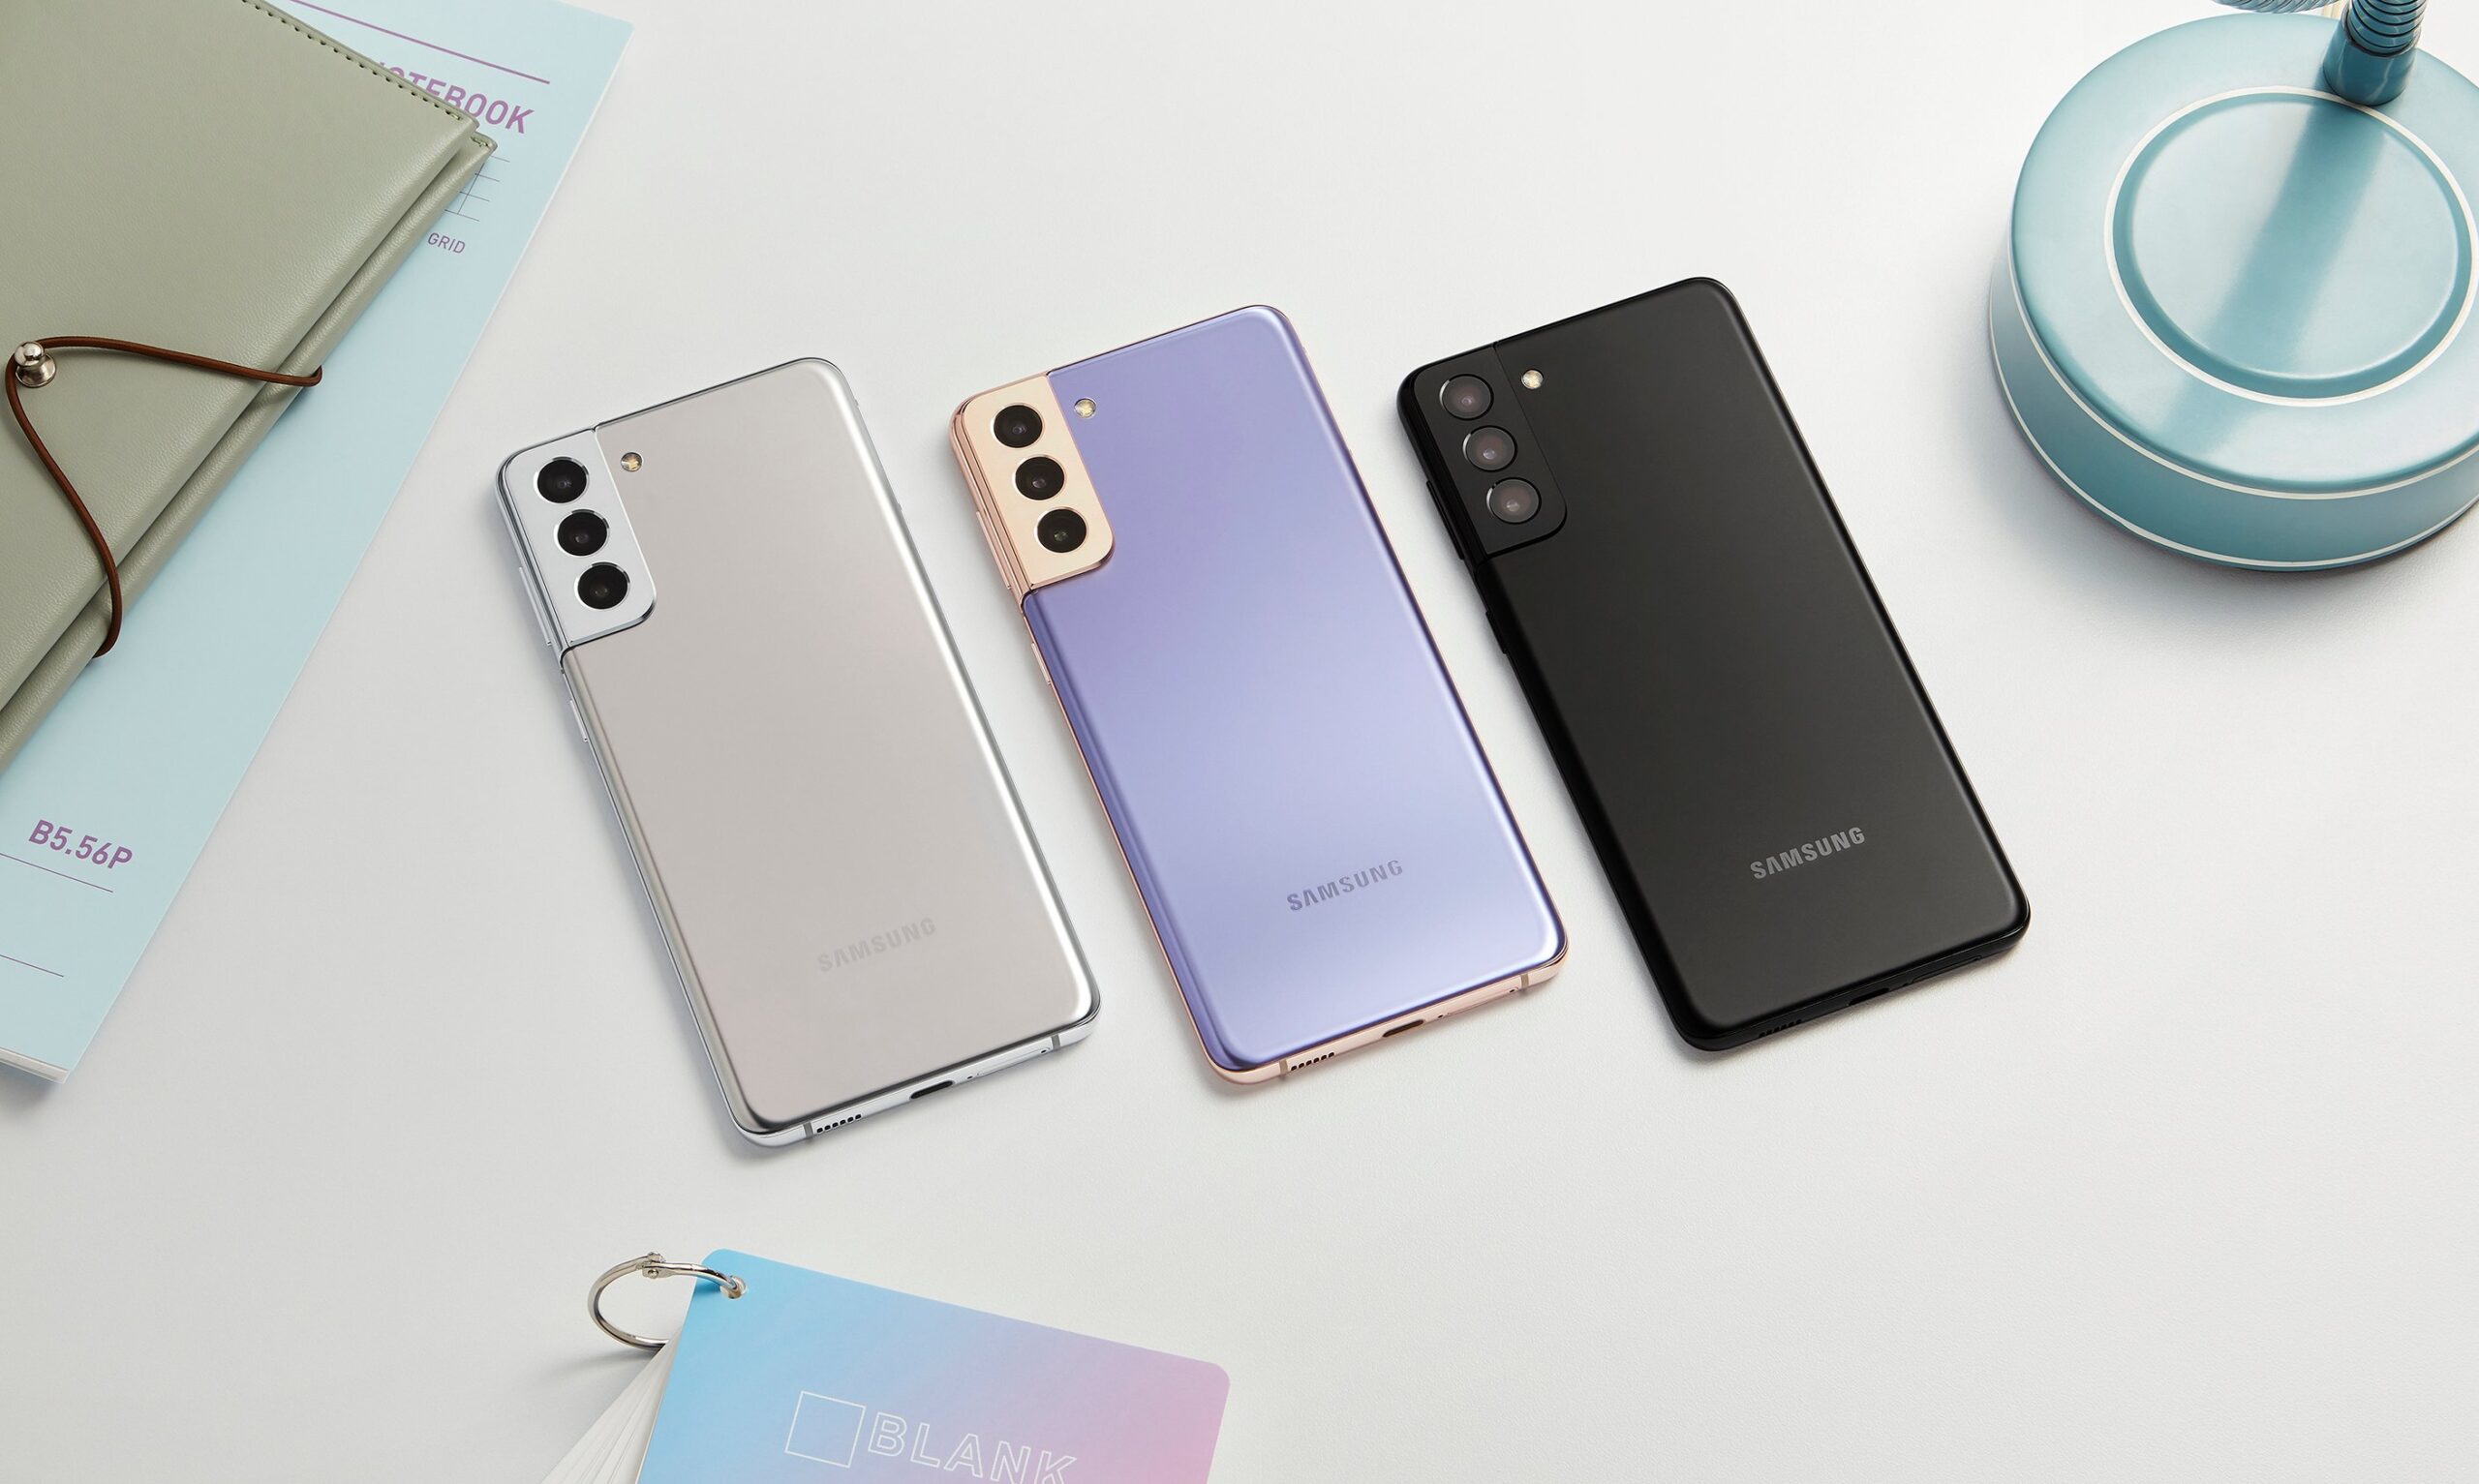 Samsung Galaxy S21 series and Galaxy A8 (2018) are already receiving March 2021 security update